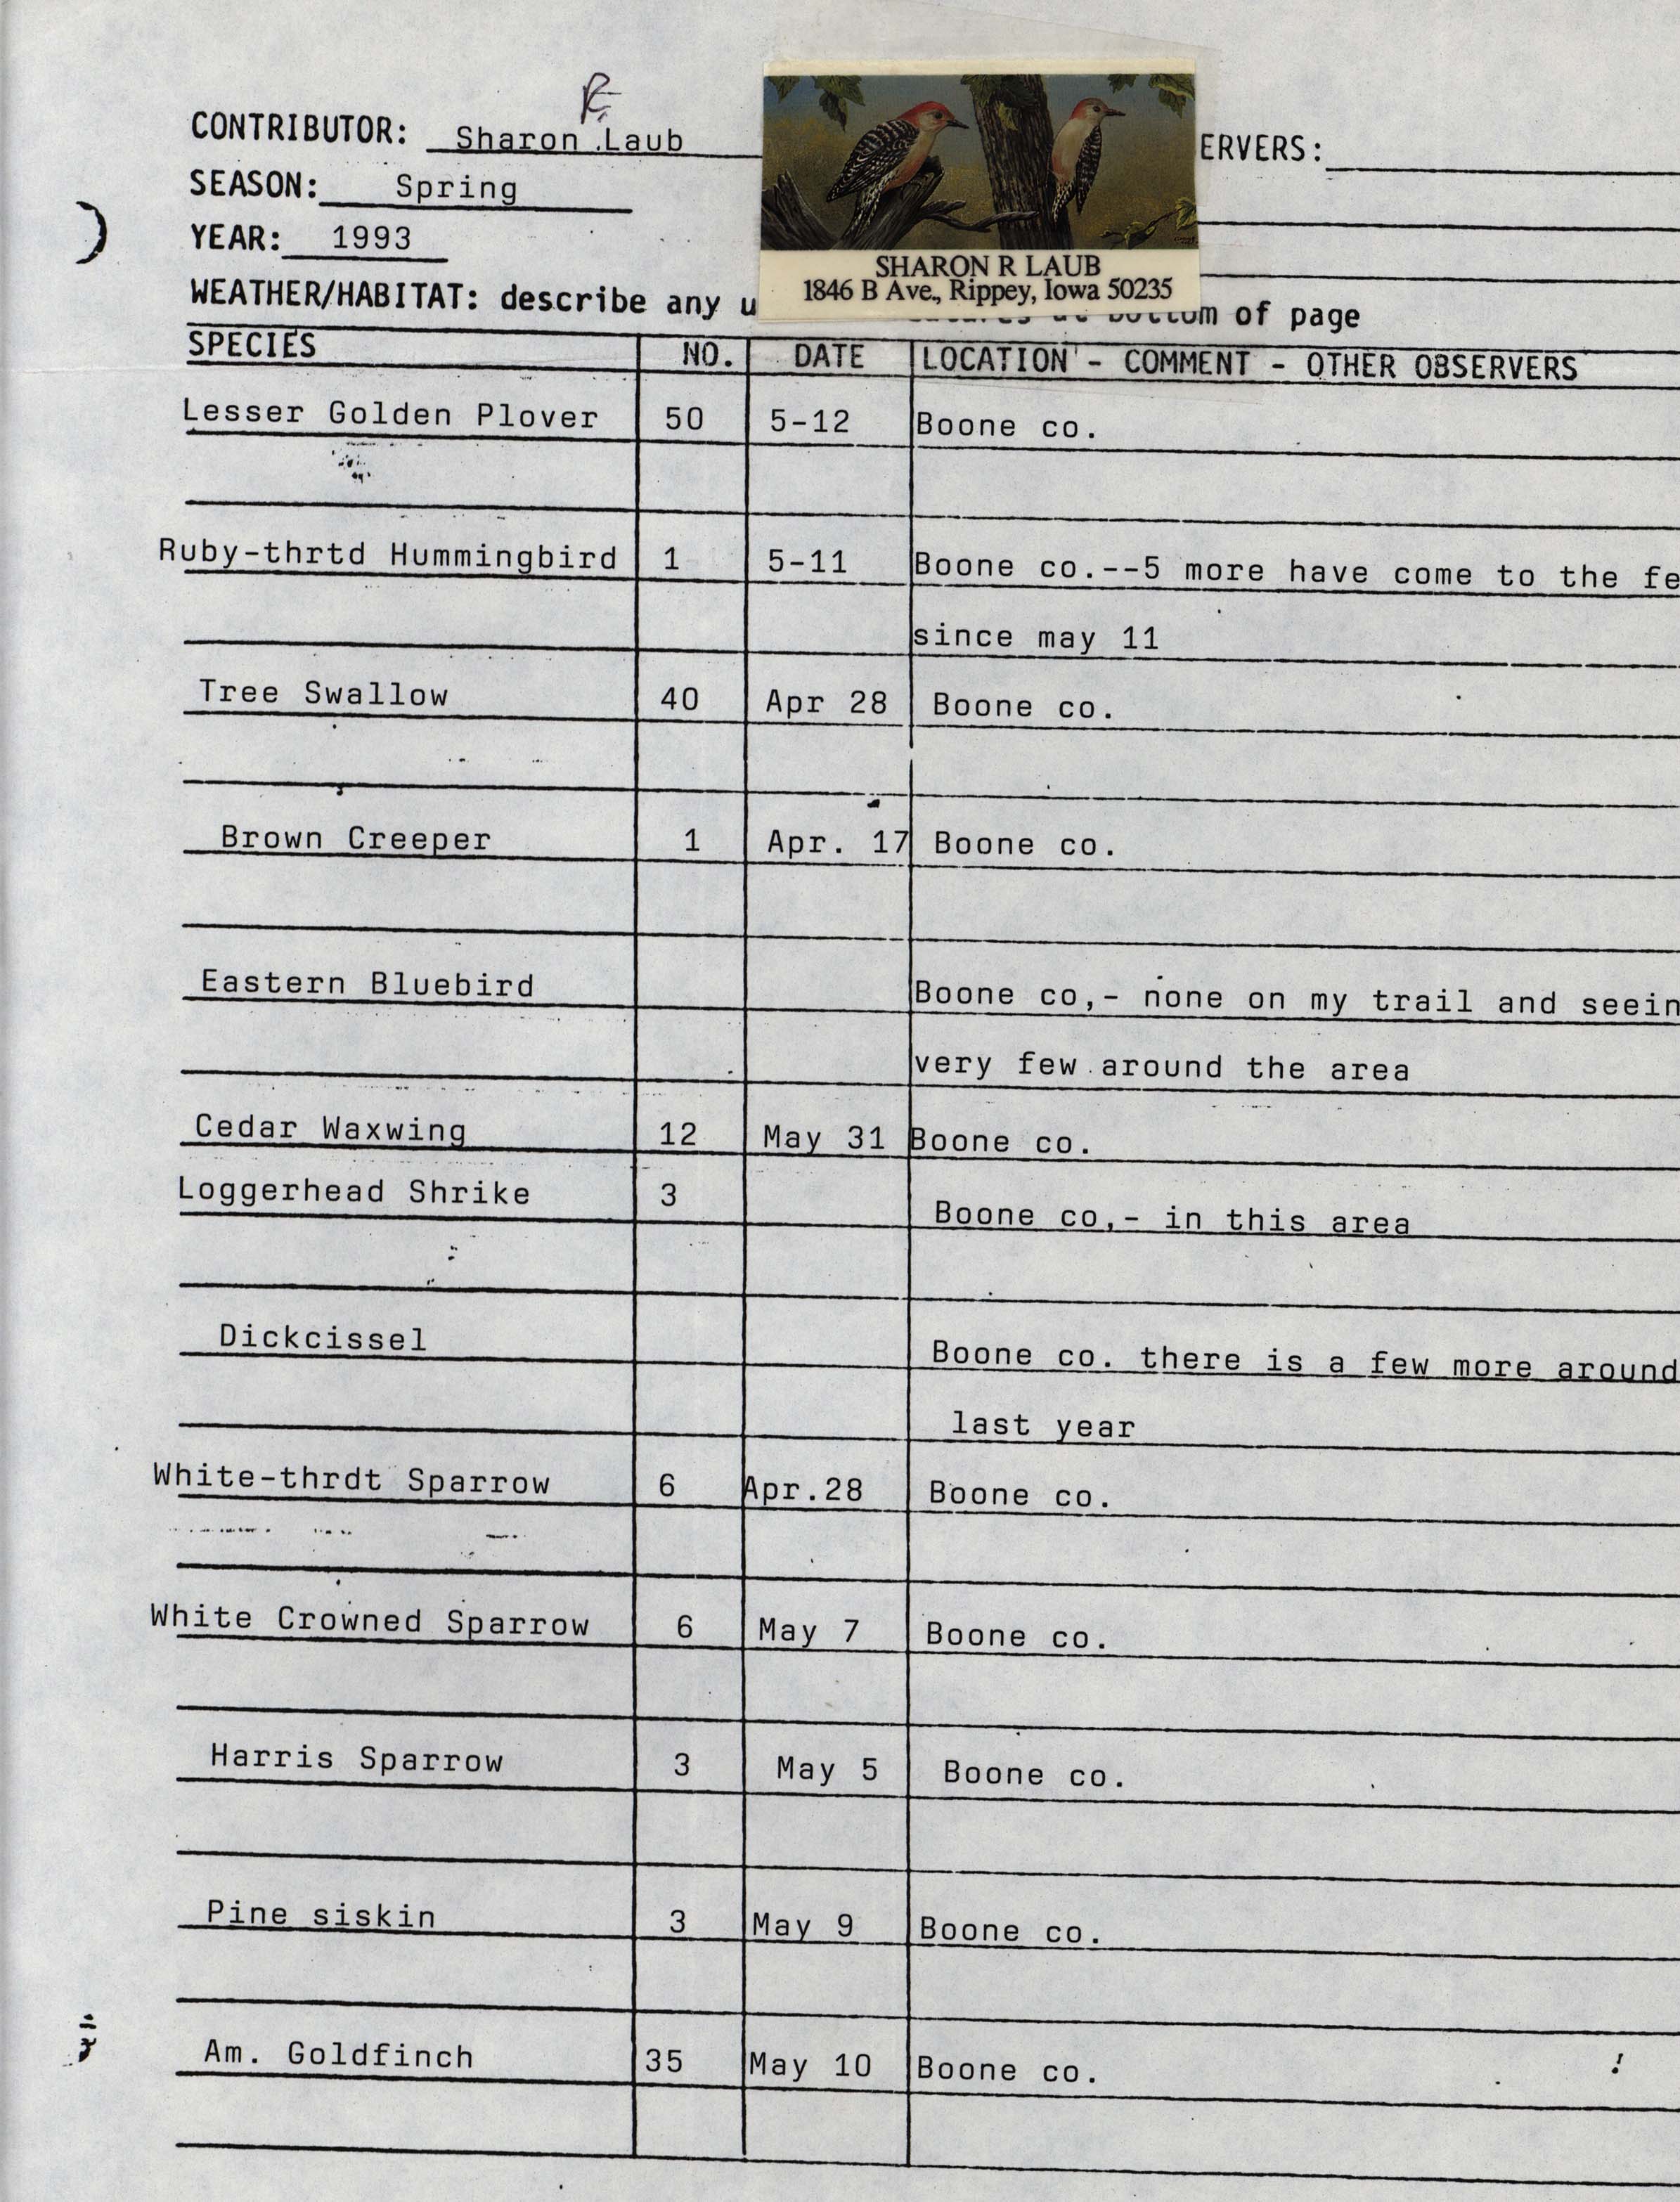 Annotated bird sighting list for Spring 1993 compiled by Sharon Laub